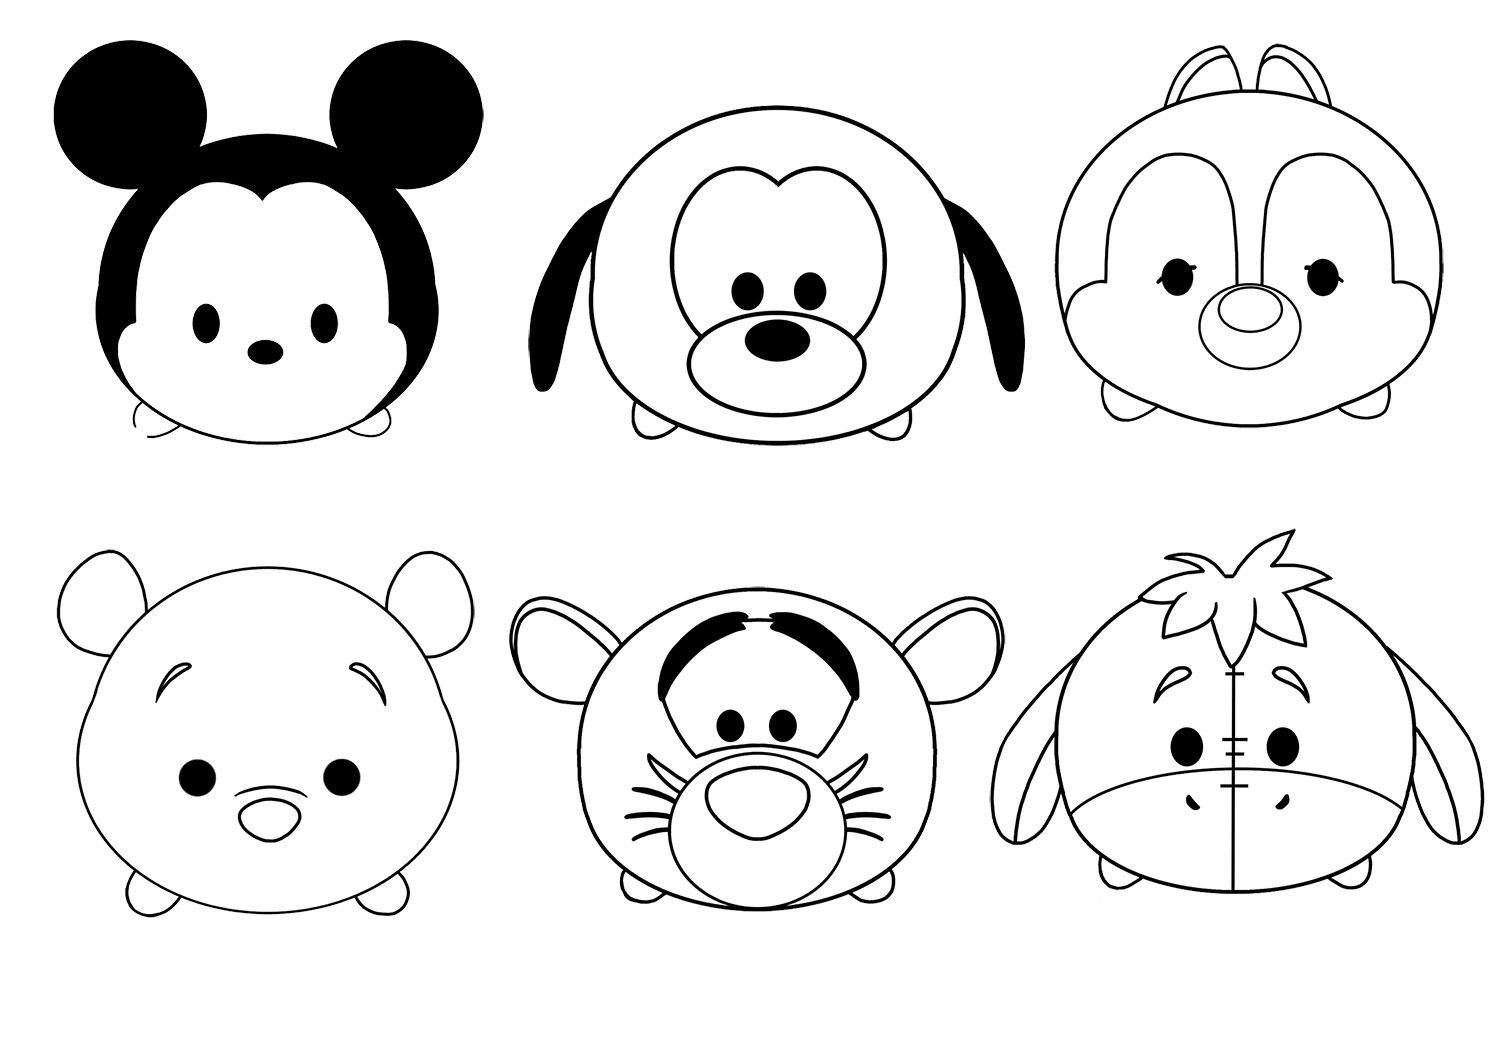 Click to see printable version of Disney Tsum Tsum Coloring page